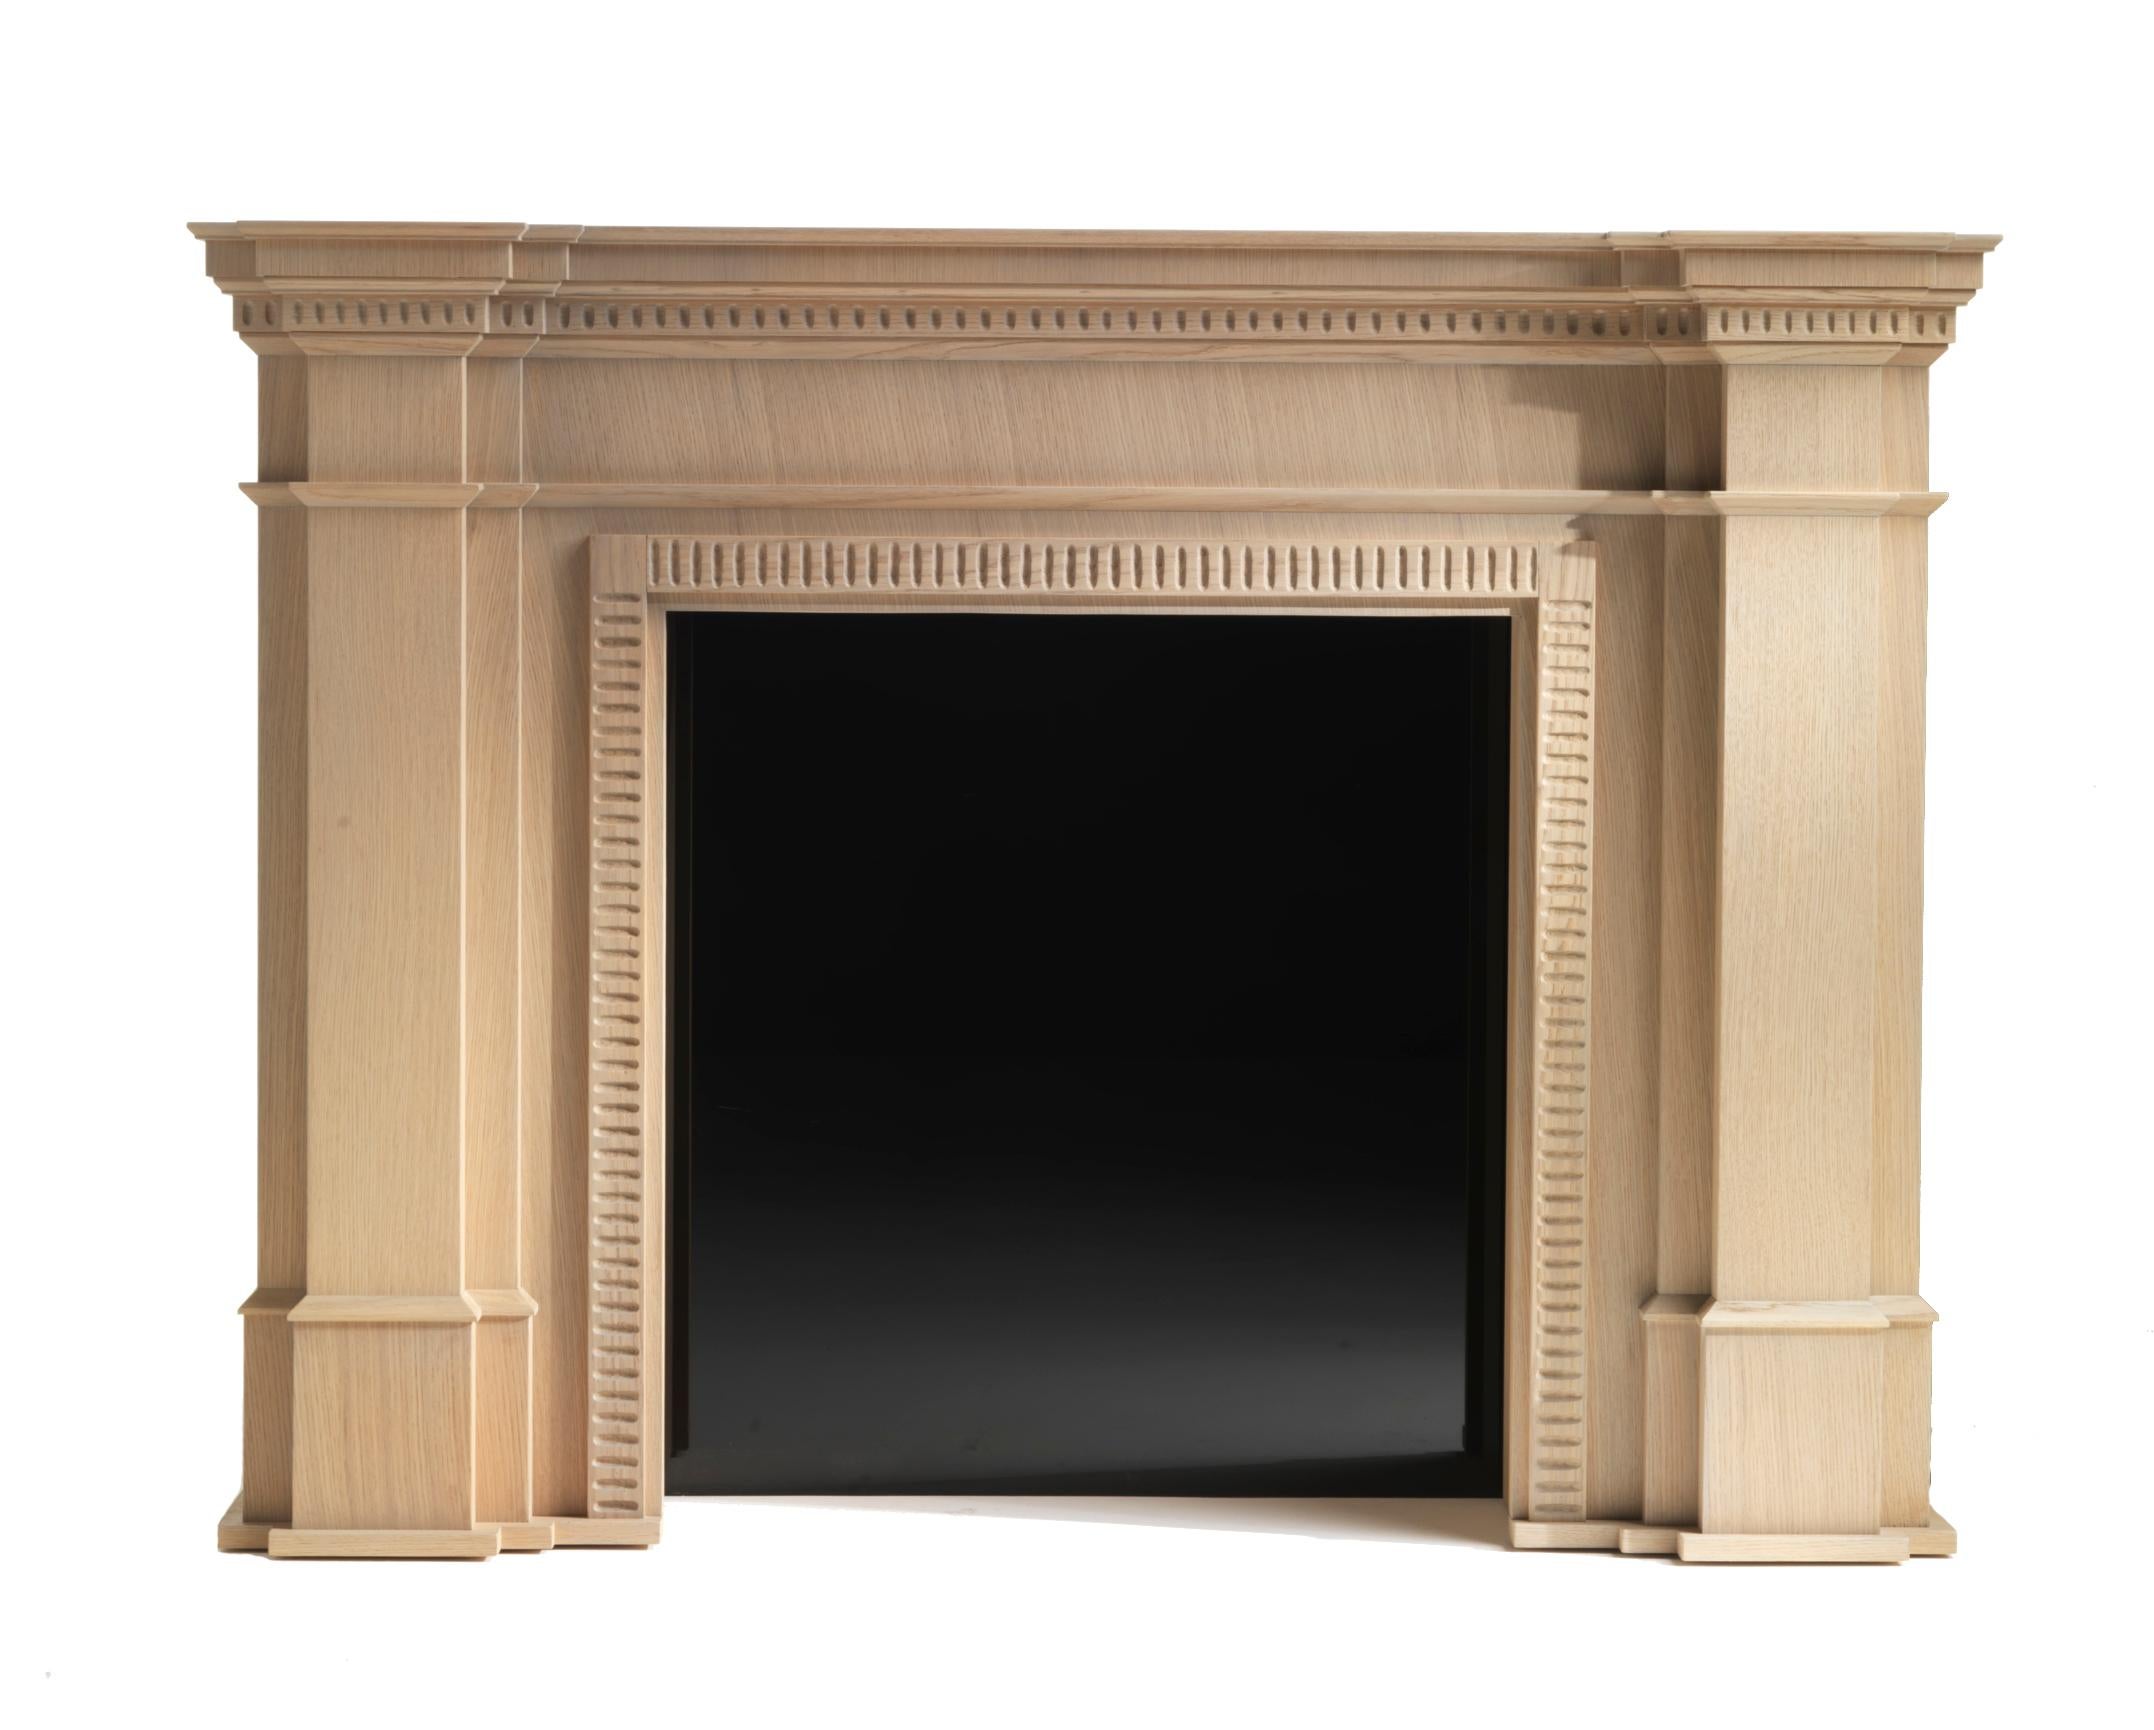 Step into the warmth of tradition with the Keddleston Antik Wooden Fireplace—a masterpiece born from British inspiration and crafted by the architectural visionaries, Archer Humphryes Architects. This fireplace is not merely a source of heat; it's a